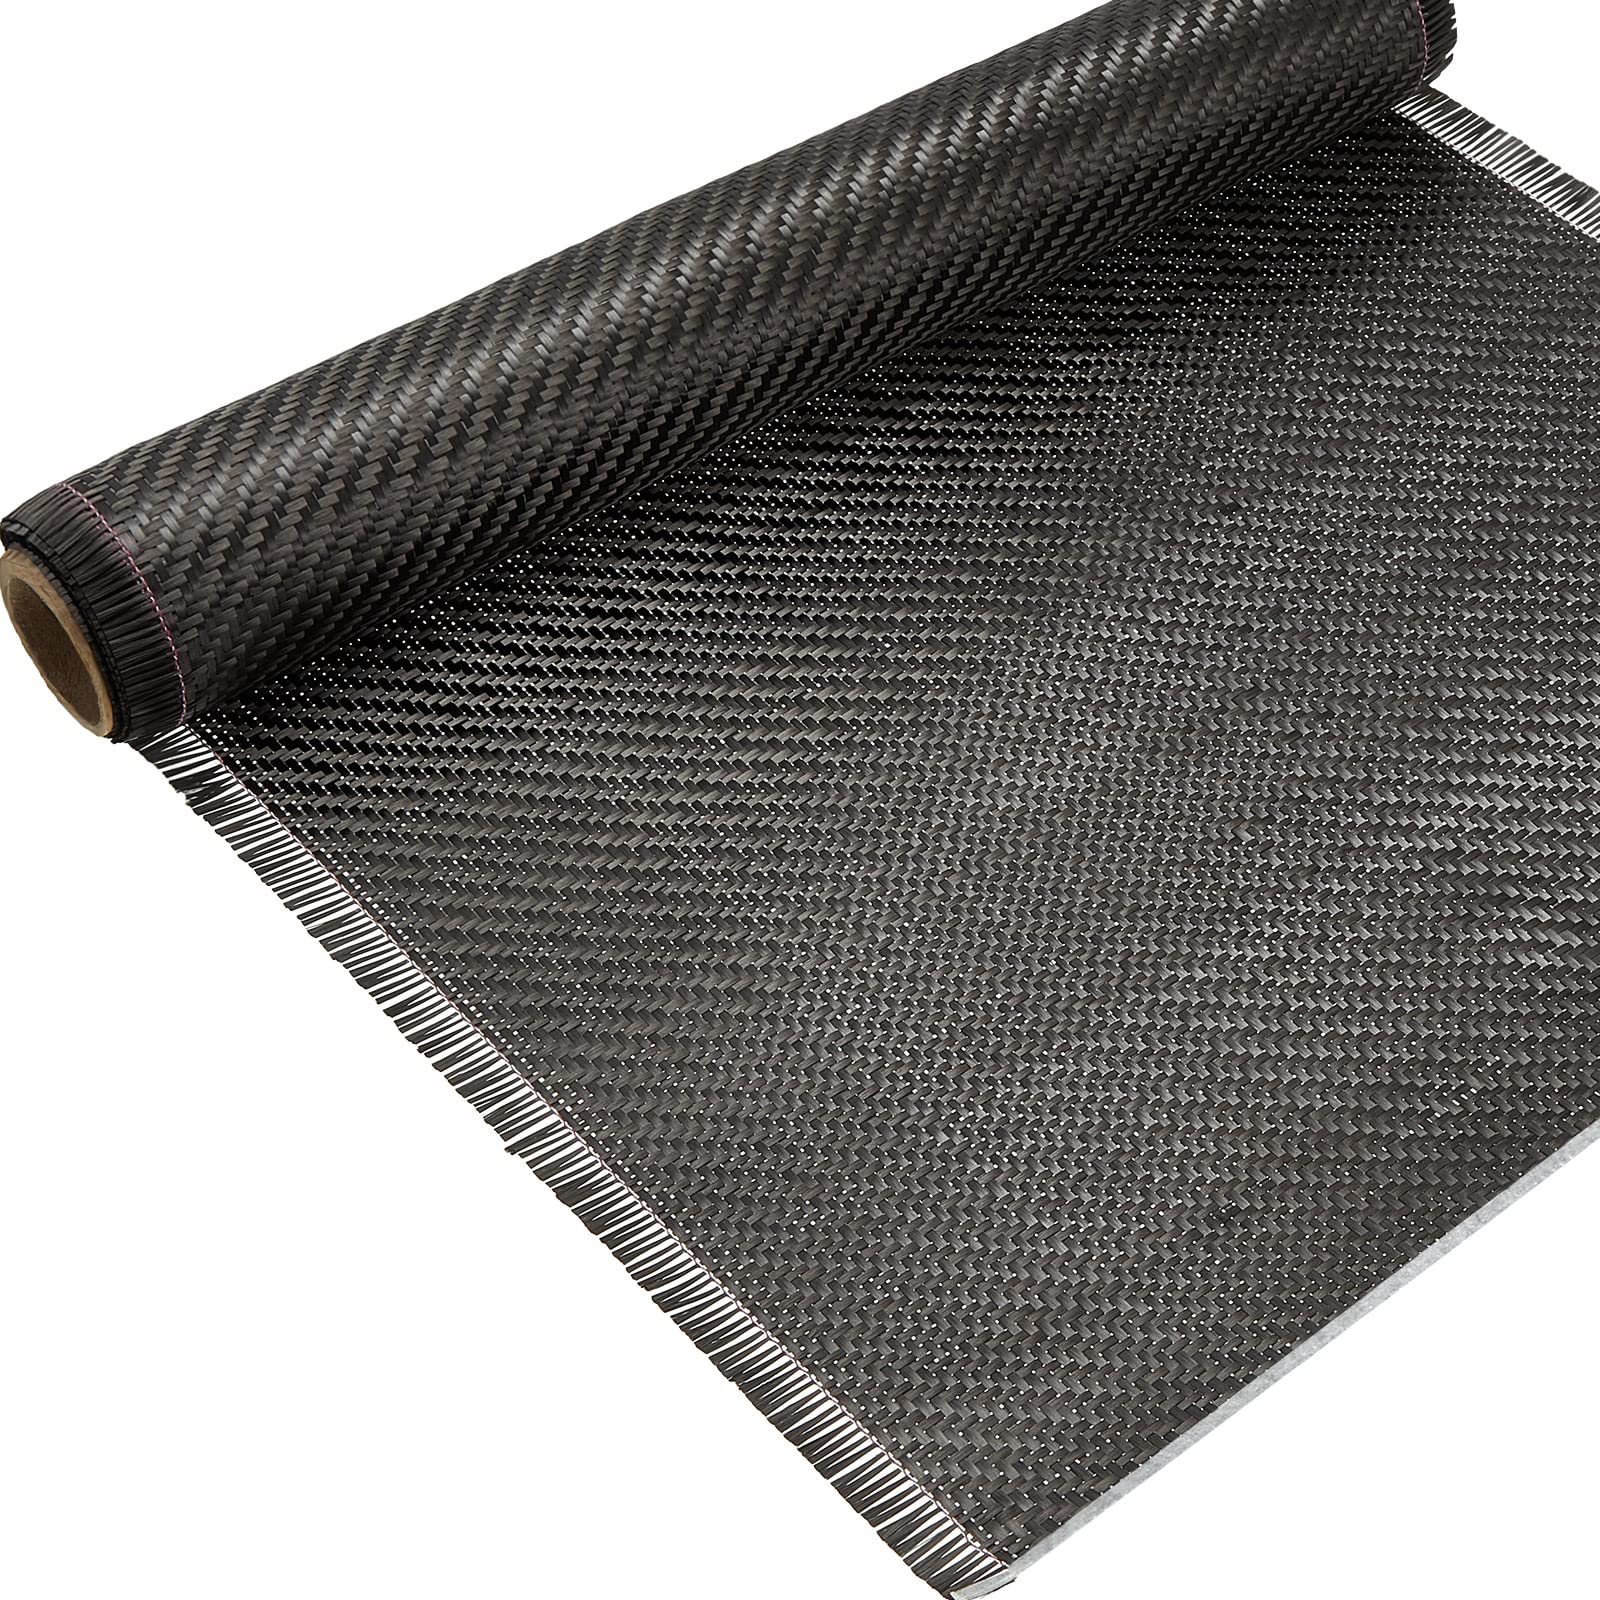 6.5ft x 12" Carbon Fiber Fabric Roll Pure Fabric Carbon Fiber Sheet 2 x 2 Twill Weave 3k/220g for Cars for Structural Reinforcement on Concrete Walls, Basements, Boats (1 Roll)